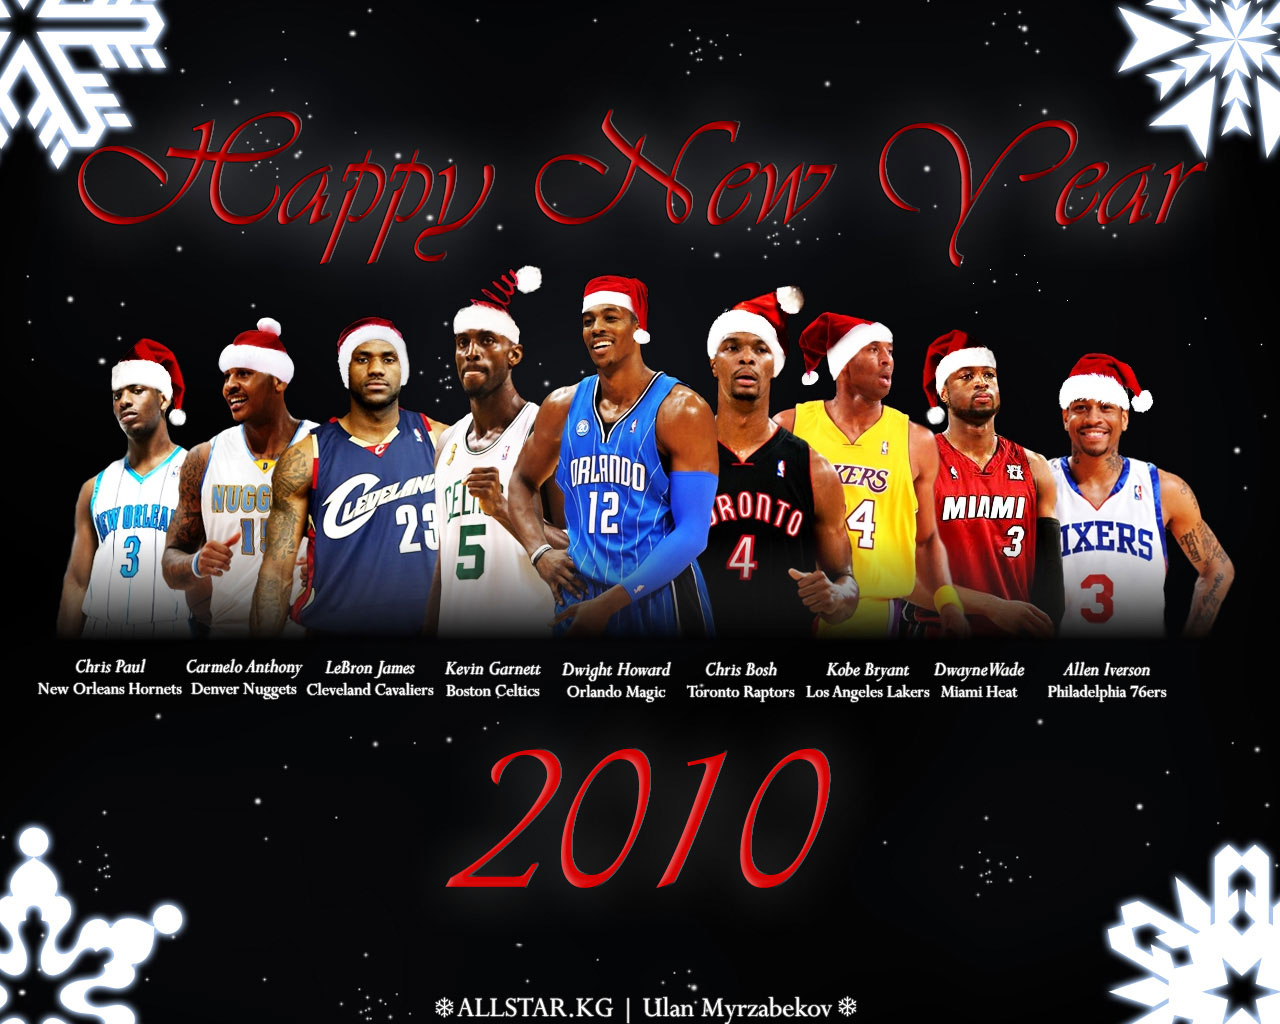 Nba Players Pictures Wallpaper 2015 cute Wallpapers